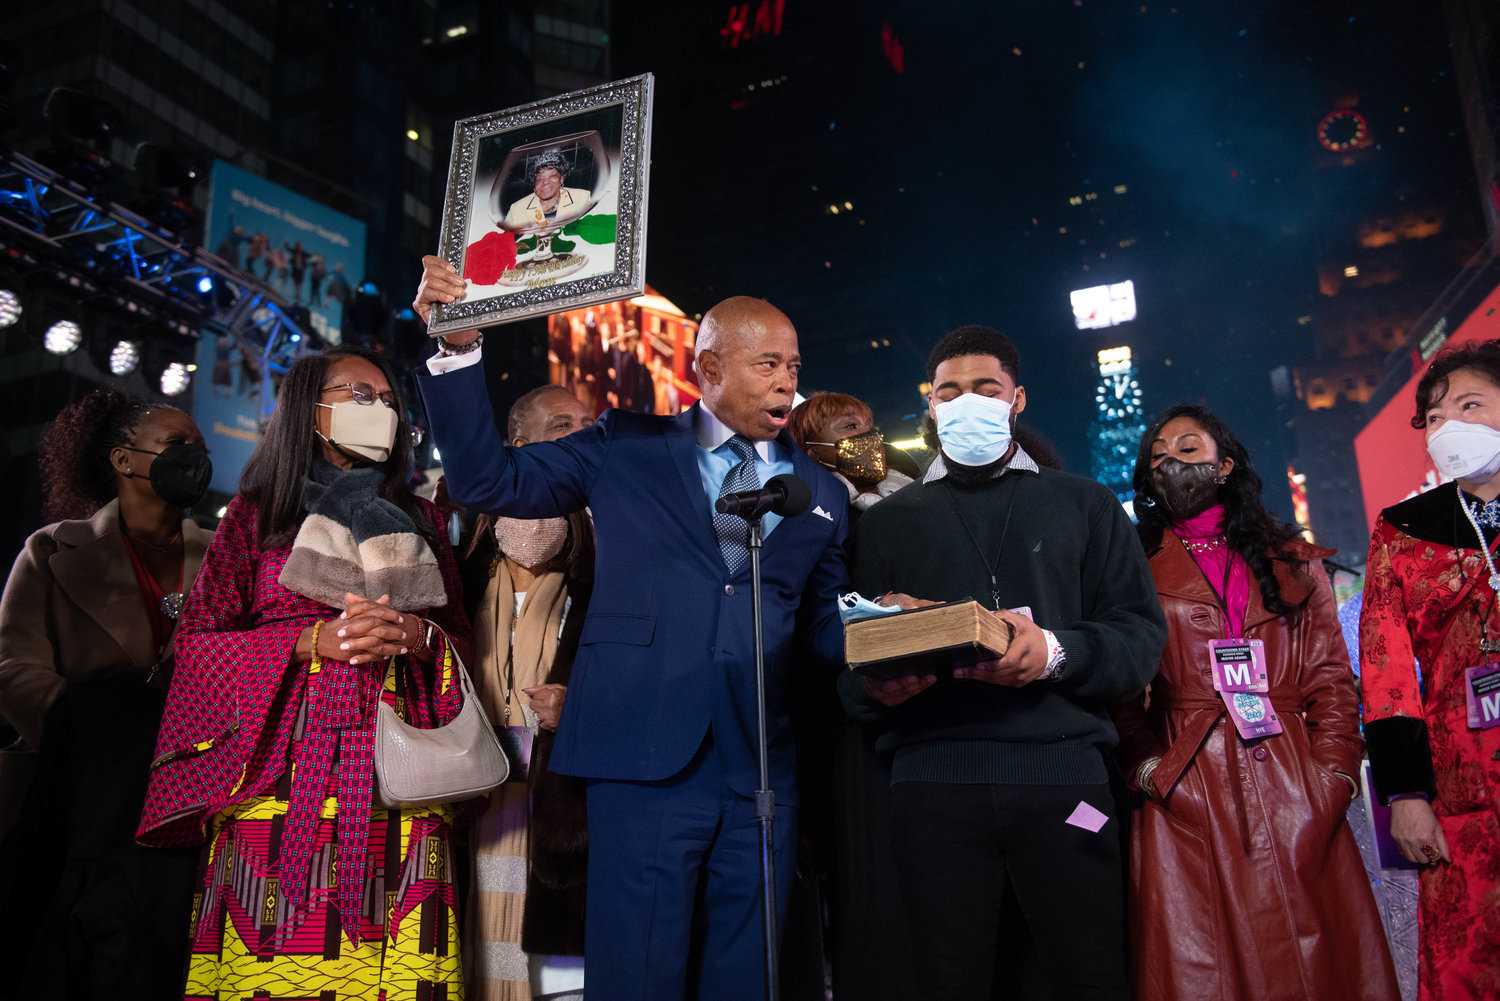 Mayor Eric Adams takes the oath of office in Times Square just moments after New York City welcomed in 2022. Adams is the city's 110th mayor, and second Black mayor.